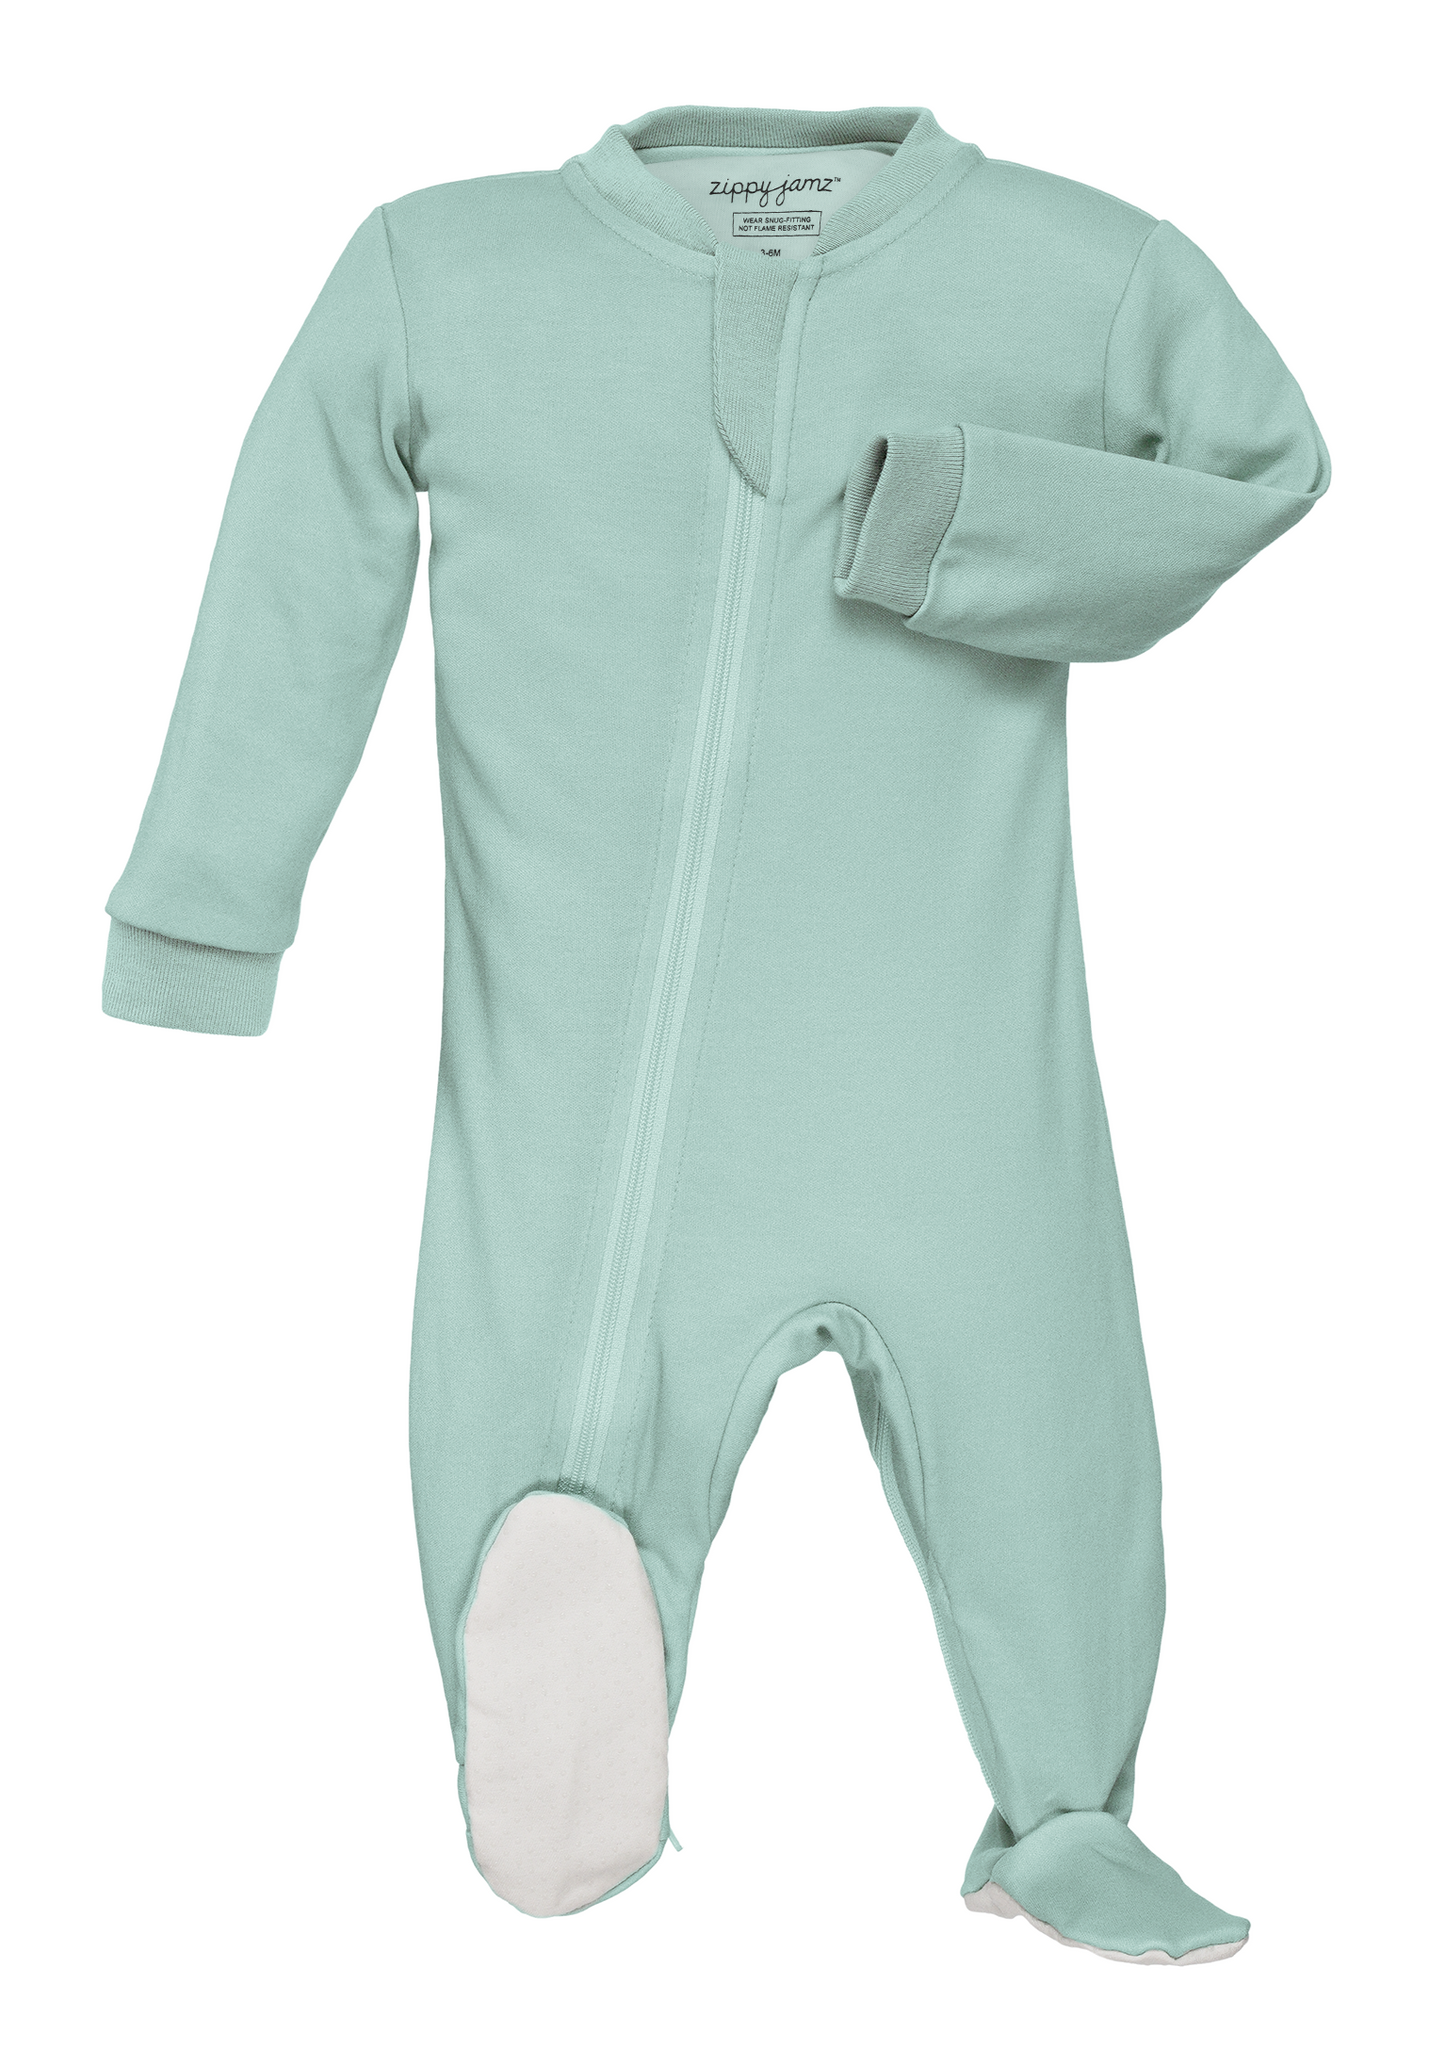 UNIKONCEPT Lifestyle Boutique and Lounge; Zippy jamz Footed Mint to Be baby pyjamas